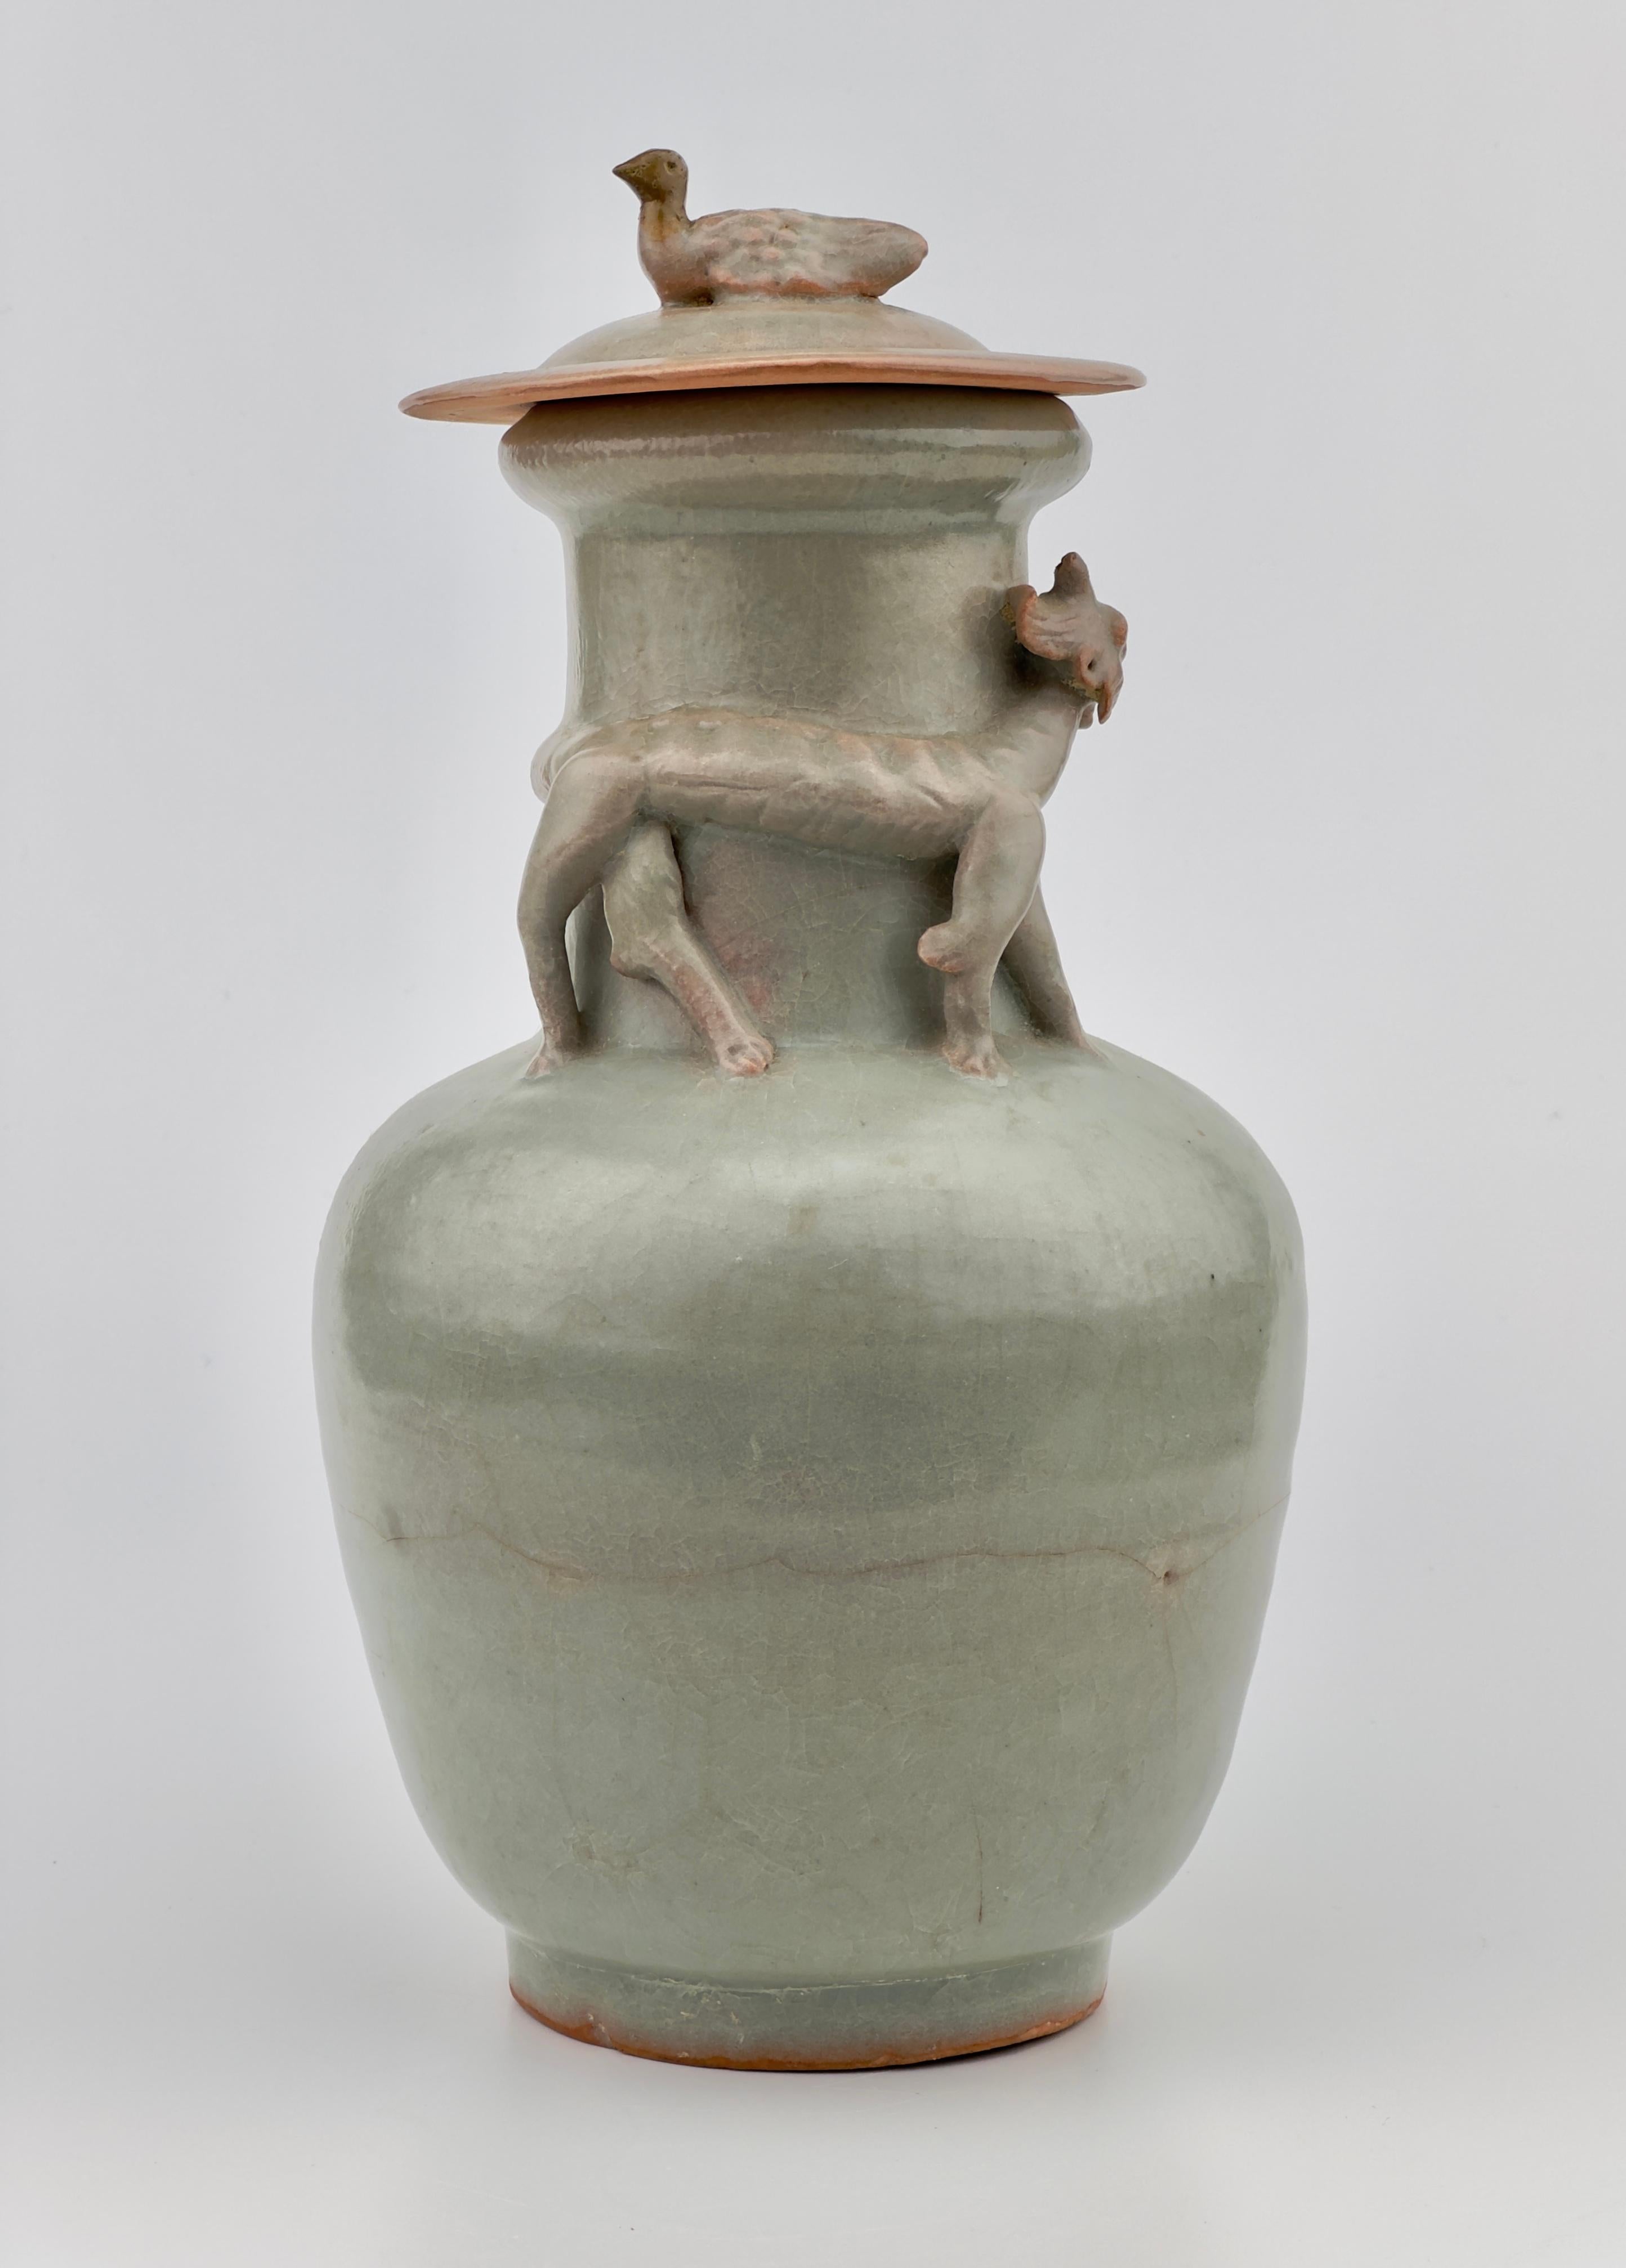 A similar jar with a cover, part of the Avery Brundage collection at the Asian Art Museum in San Francisco, is featured in Mary Tregear's 